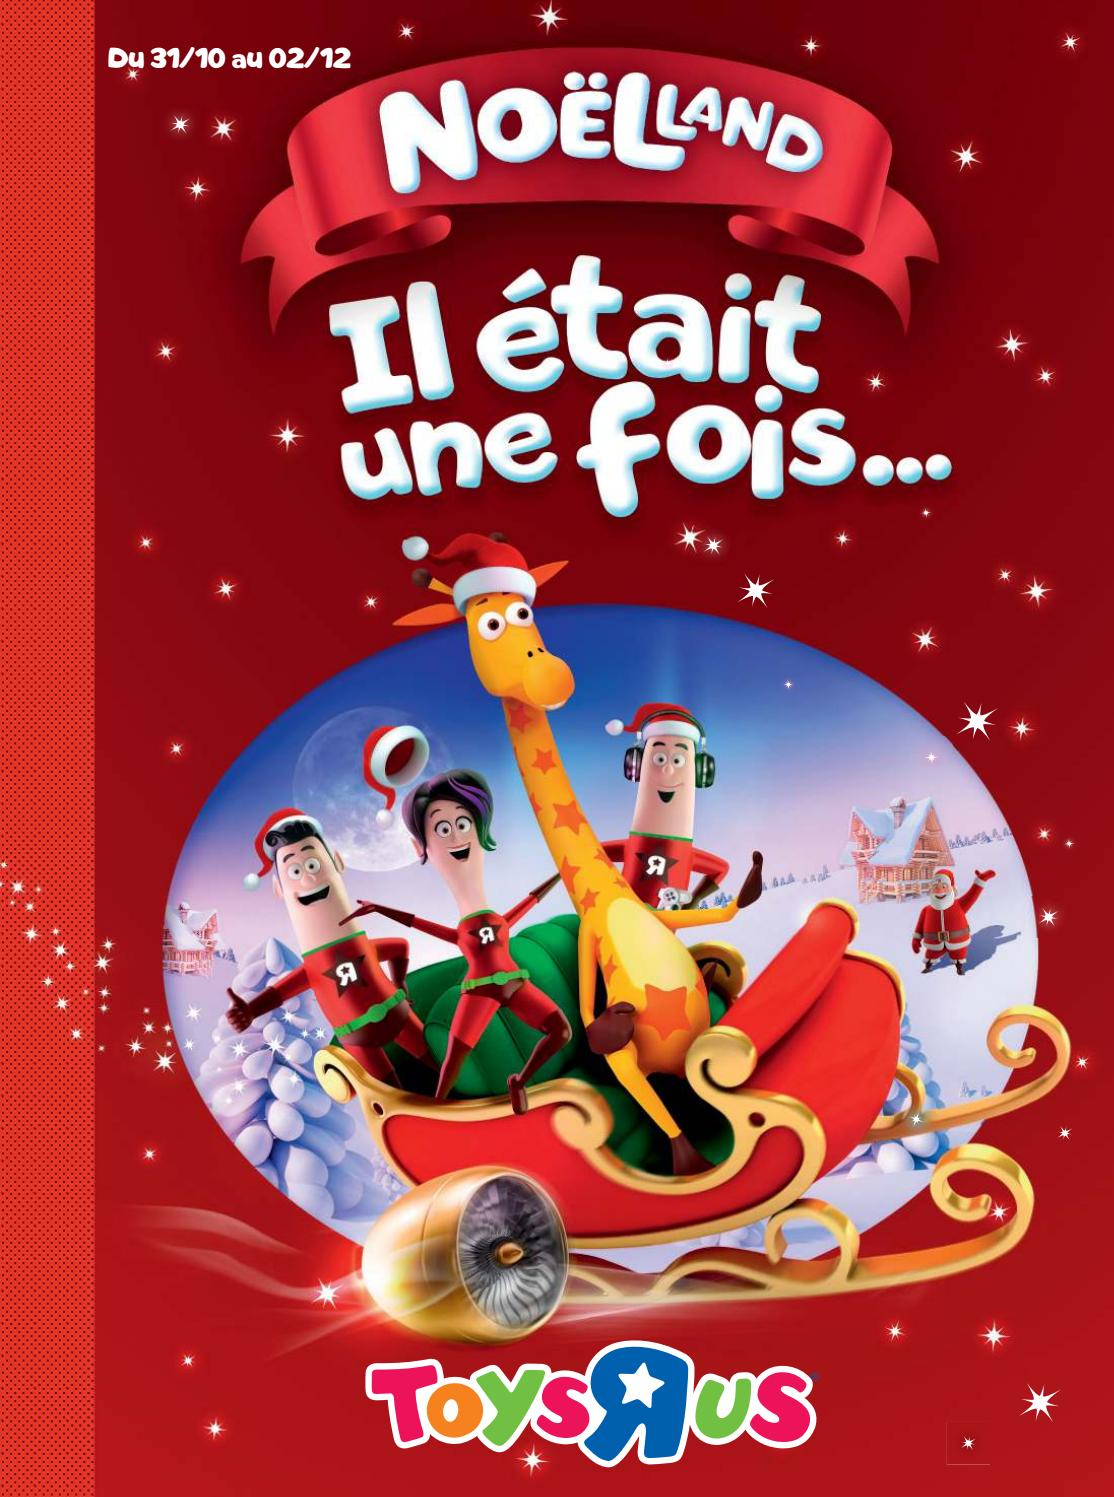 Catalogue Jouets Noël 2018 - Toys'r'us By Yvernault - Issuu à Piscine A Balle Toysrus